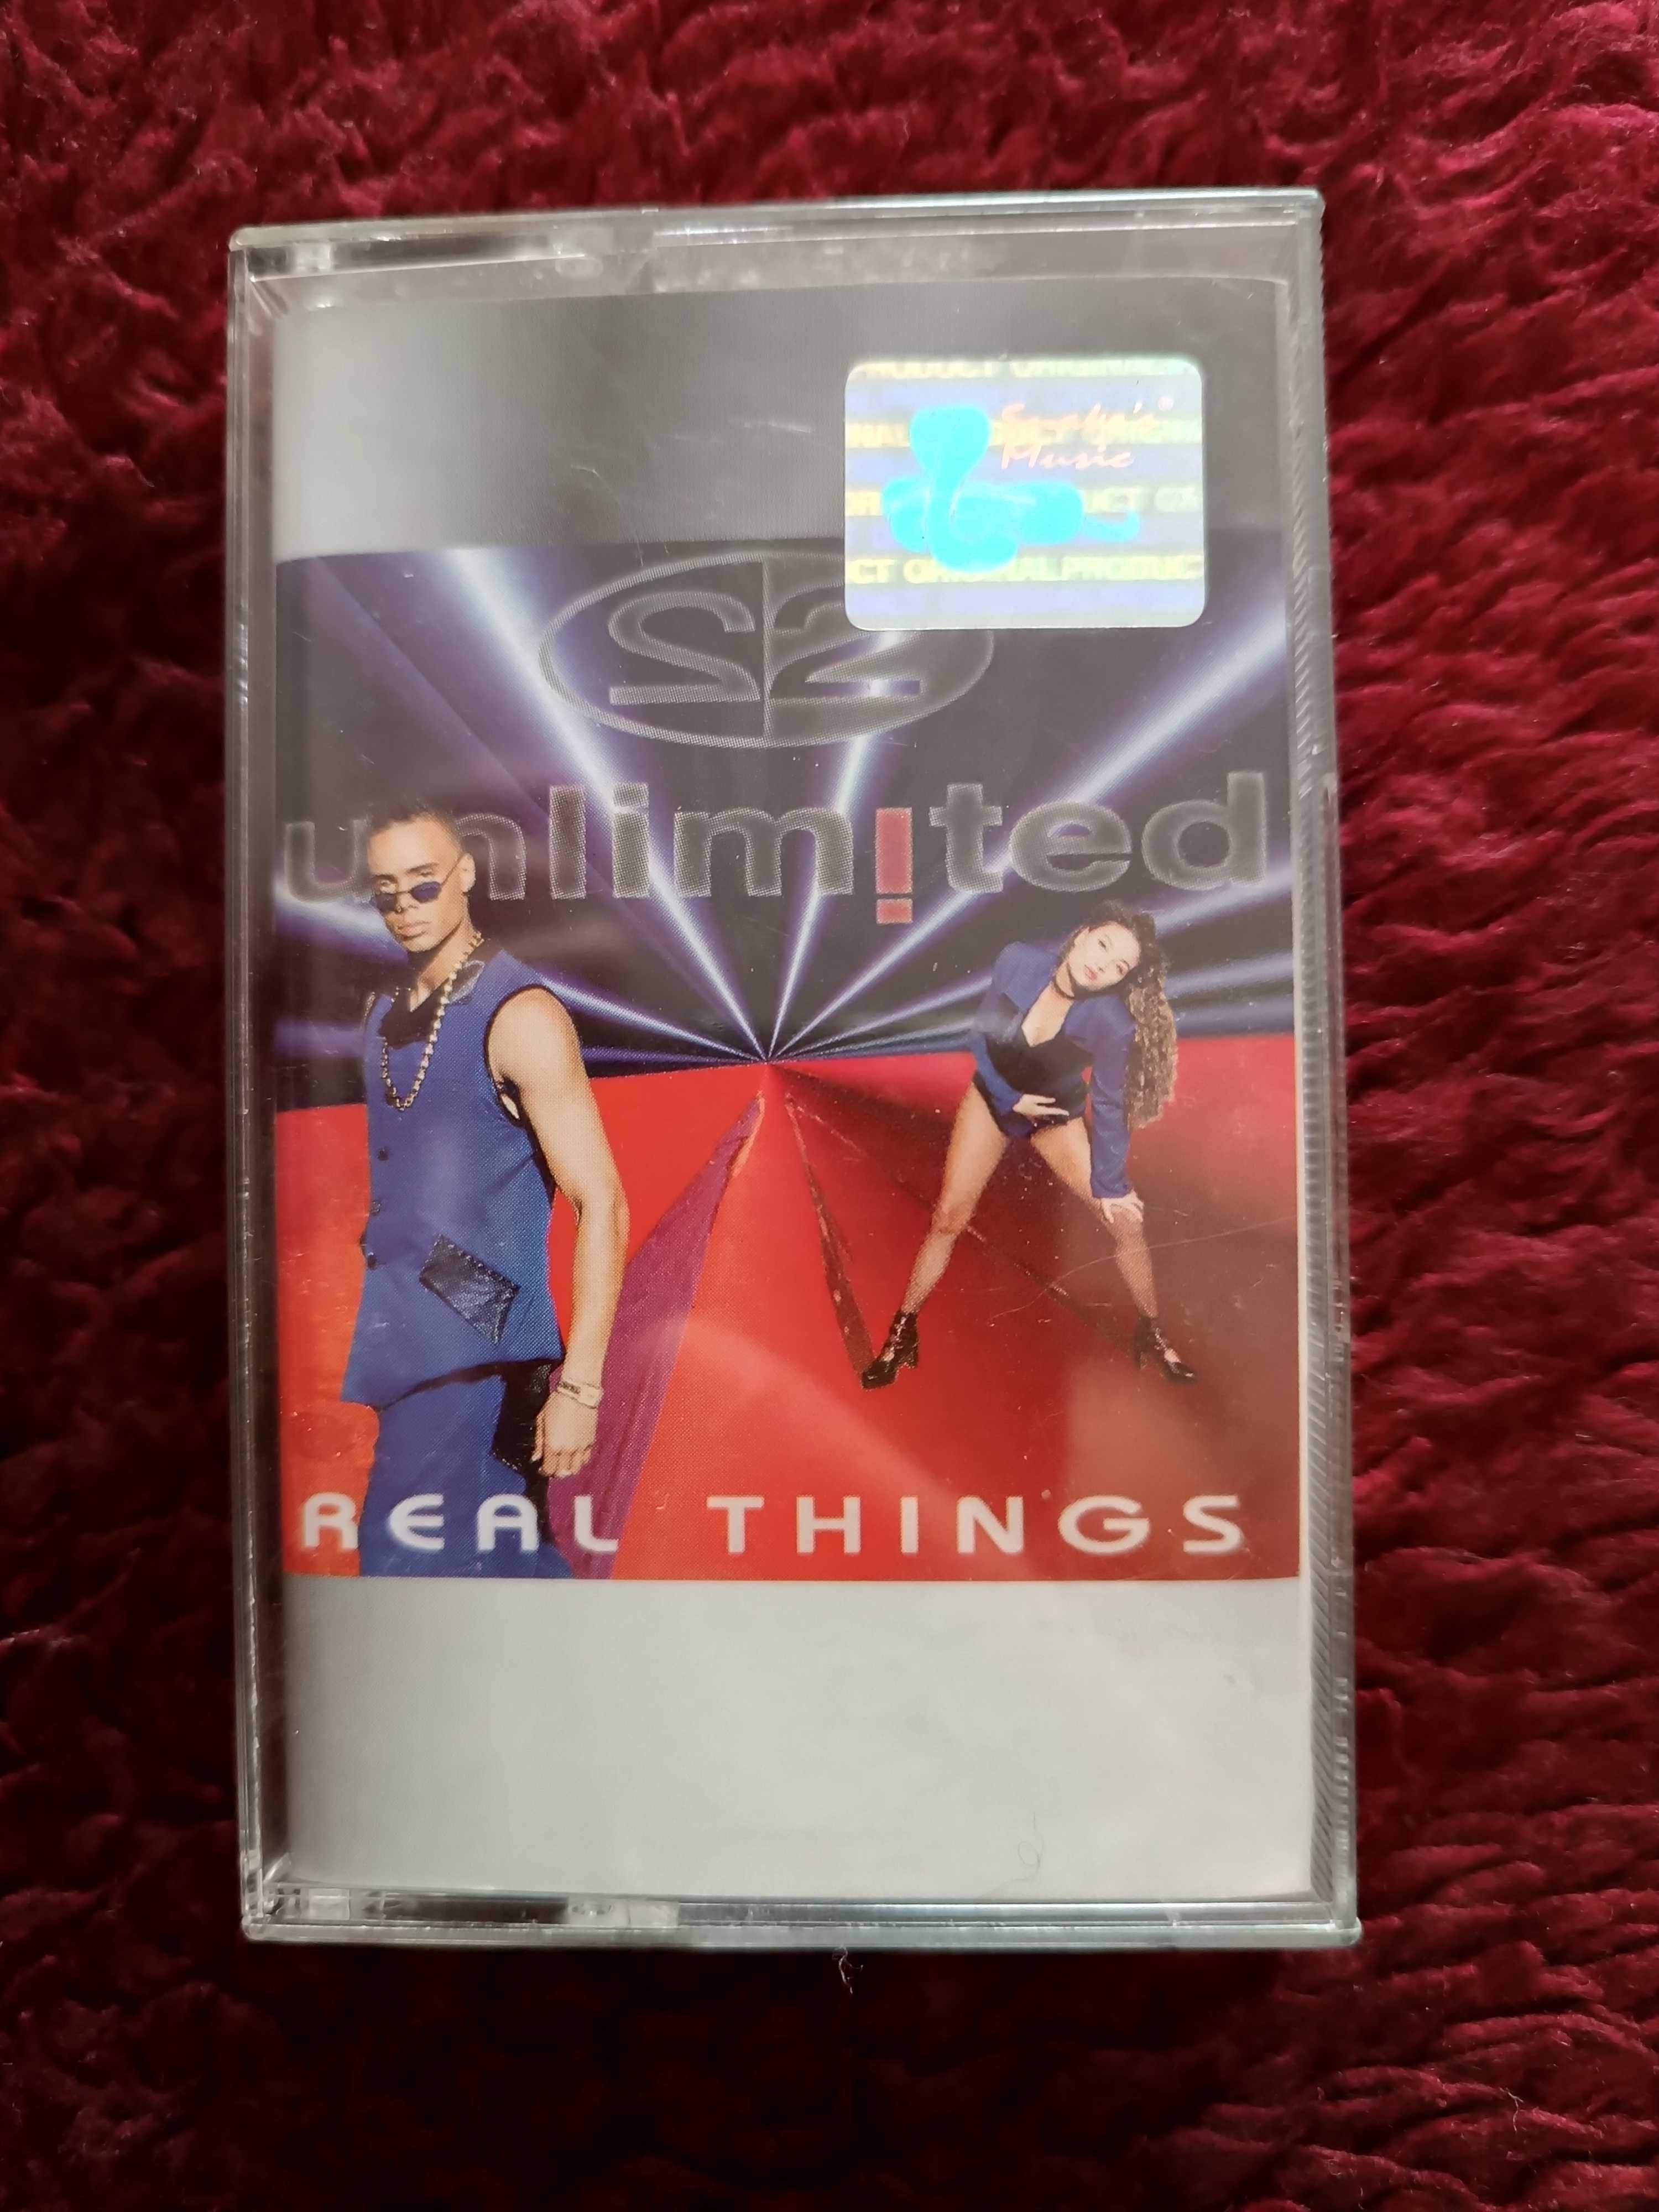 2 unlimited - Real things.